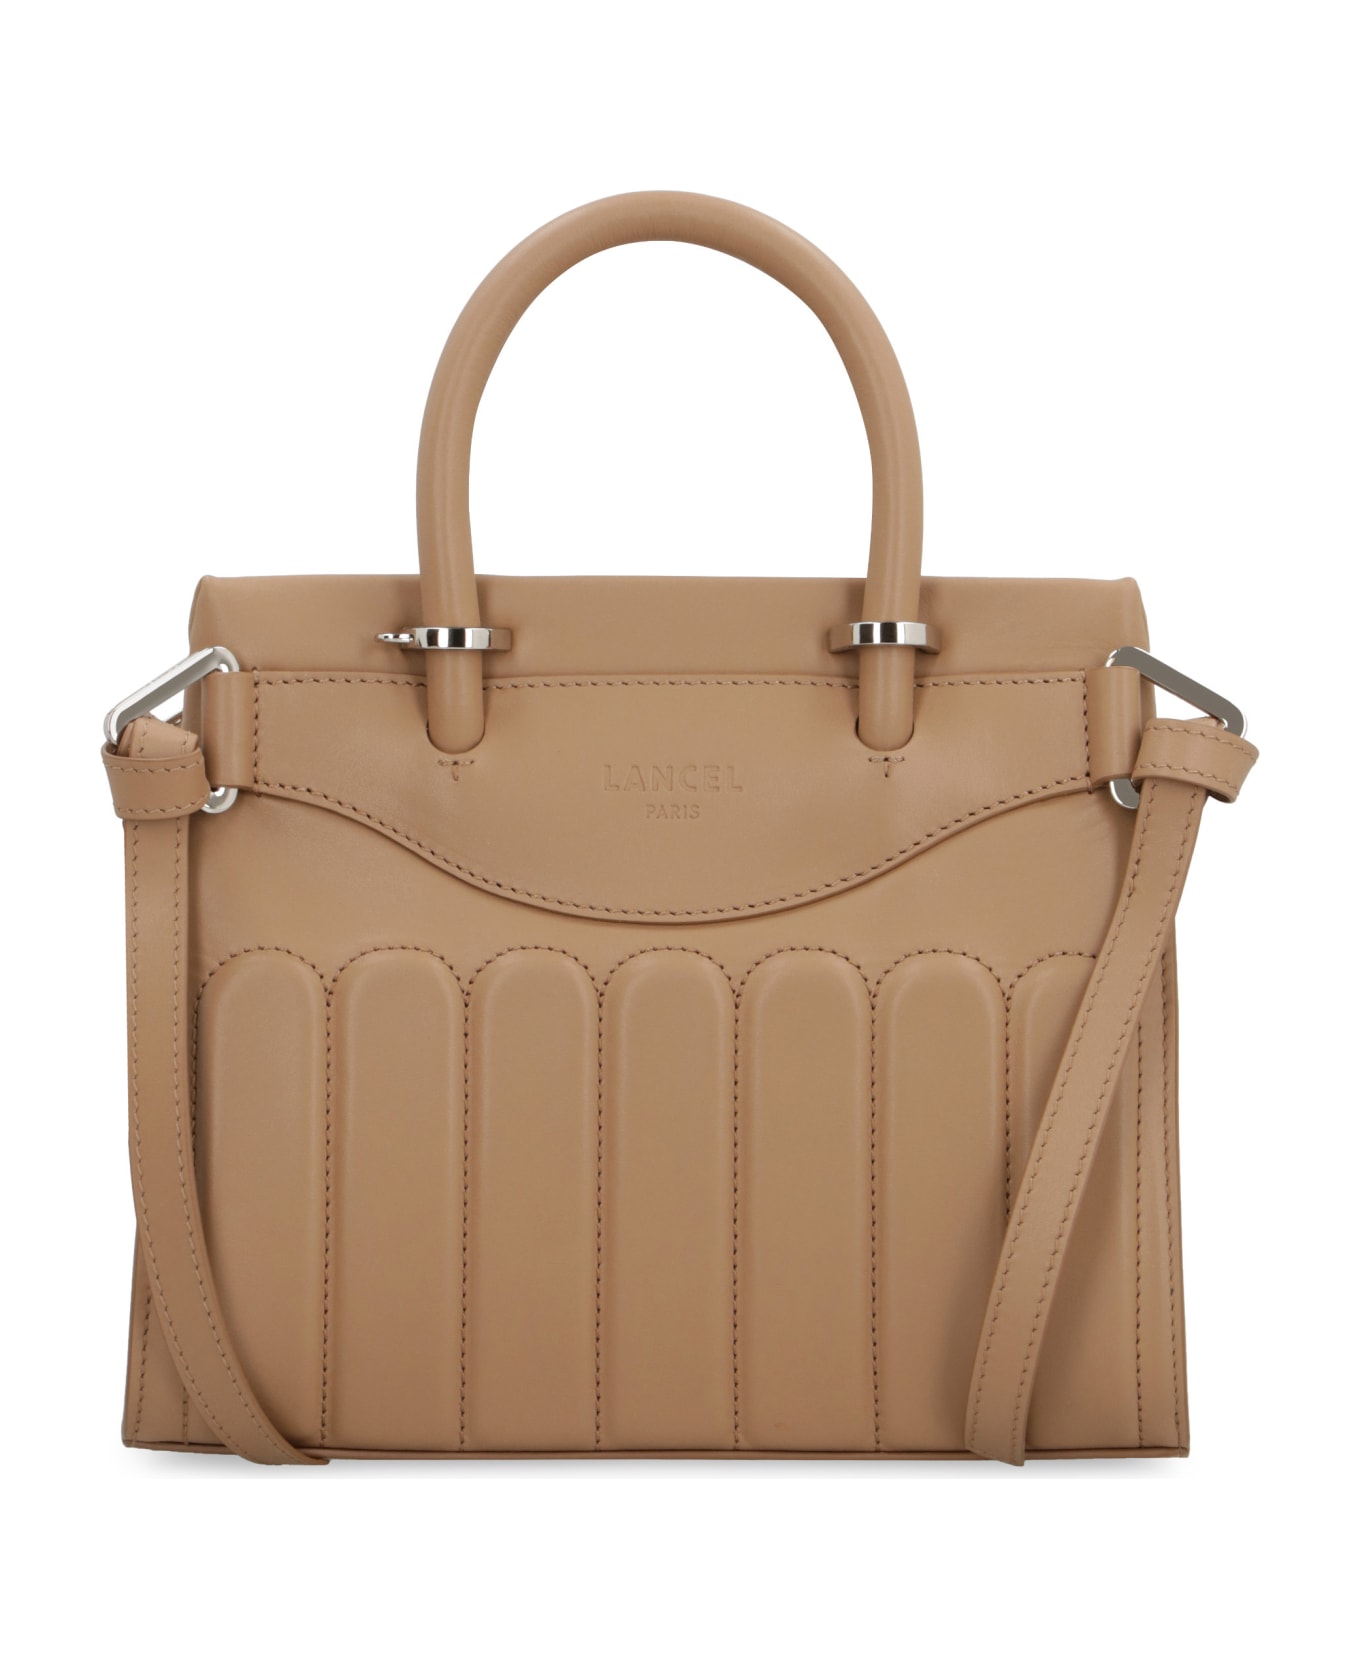 Lancel Rodeo Leather Tote - Camel